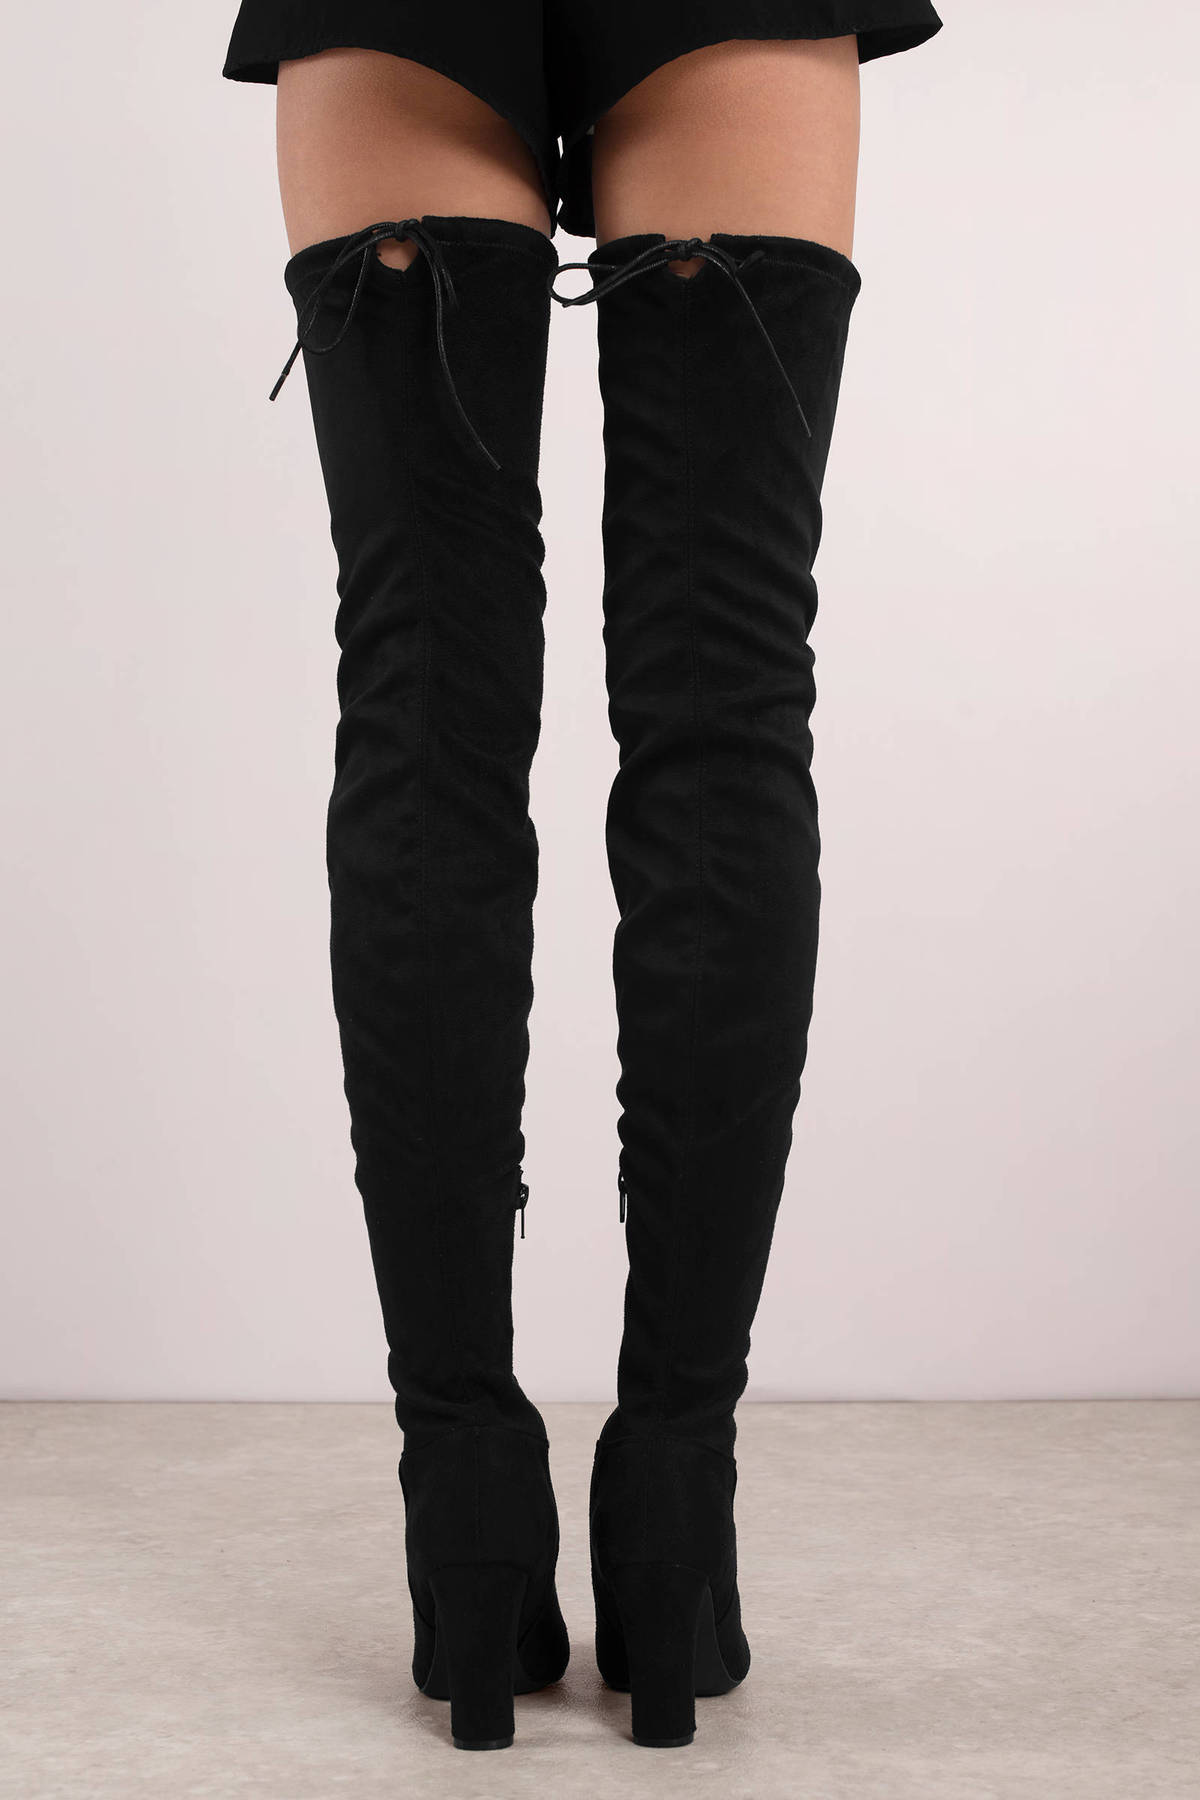 Black Boots - Skinny Thigh High Boots - Tall Black Dressy Boots